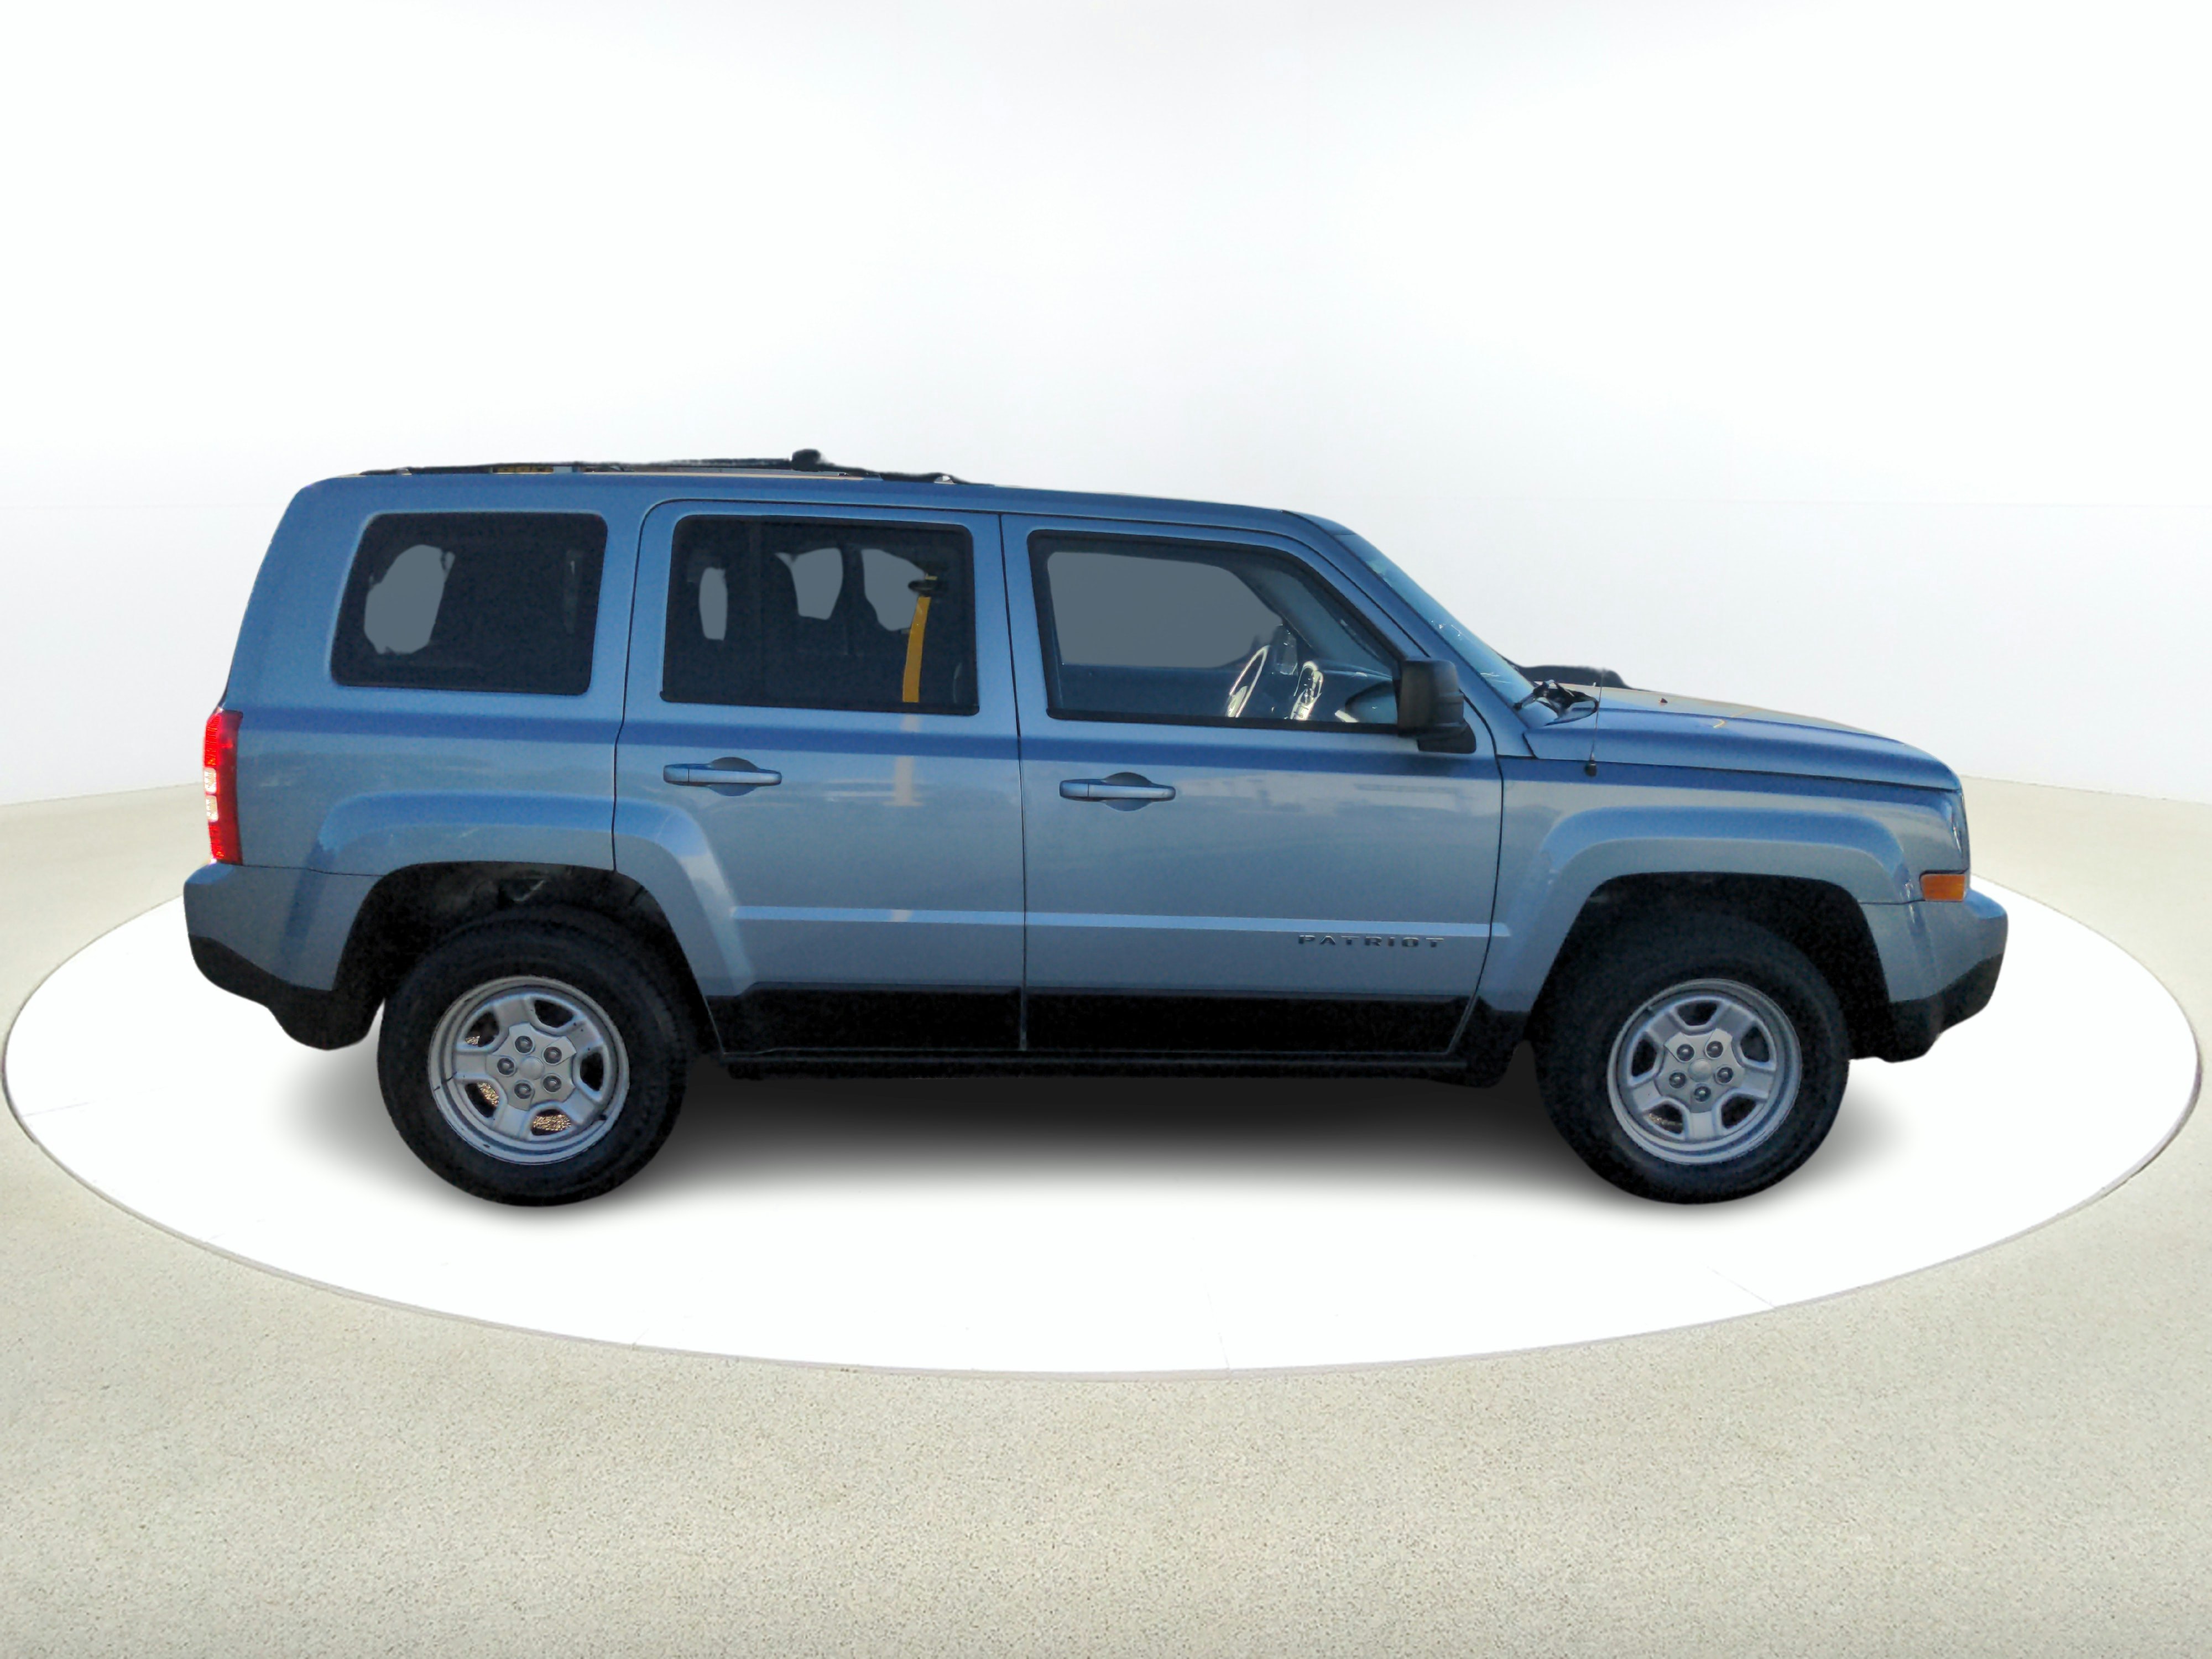 How to Reset ABS Light on Jeep Patriot: Ultimate Guide